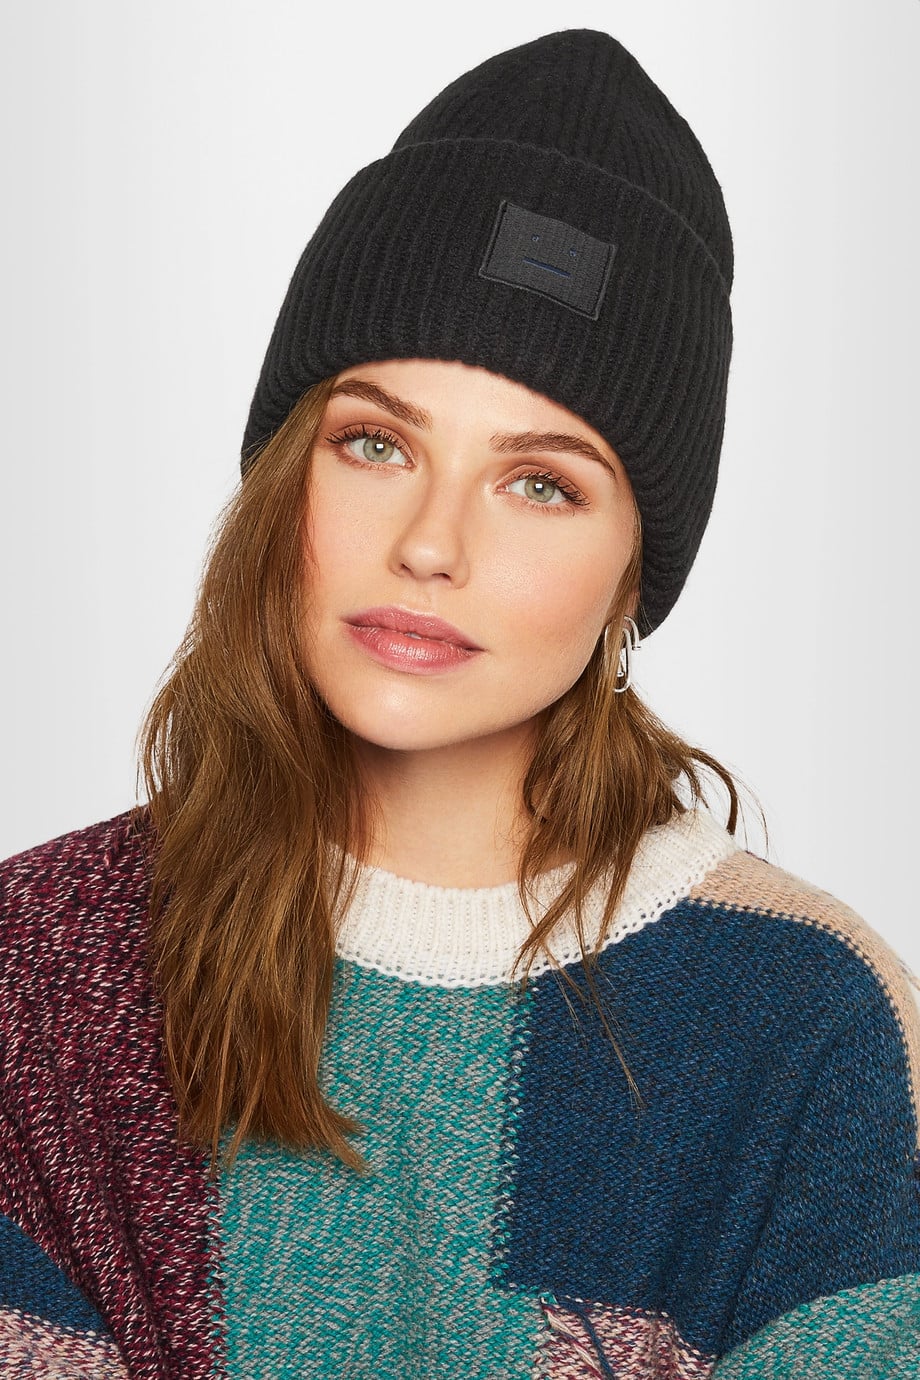 Roux fremtid Tyranny Acne Studios Pansy Beanie | This Is Everything Our Editors Want For the  Holidays | POPSUGAR Fashion Photo 25